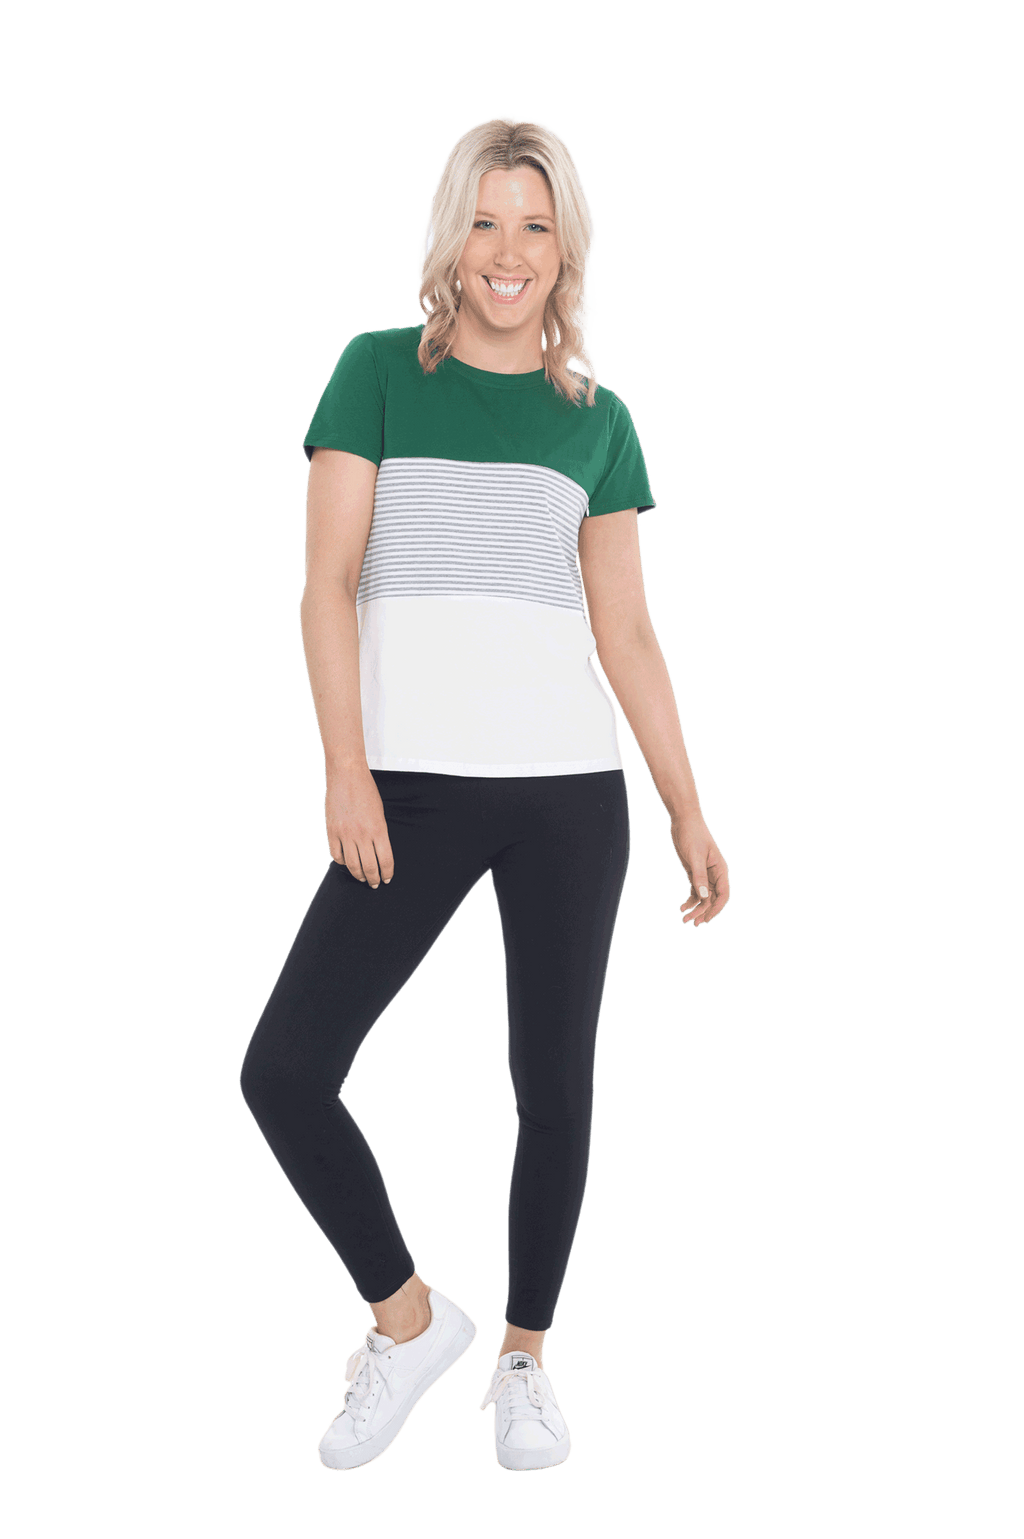 Petite model facing camera wearing colour blocked, short sleeved tee. Colour block is bottle green in top third, grey & white stripe in middle third, white in bottom third. Features rounded neckline. Jamie available in sizes 6-26